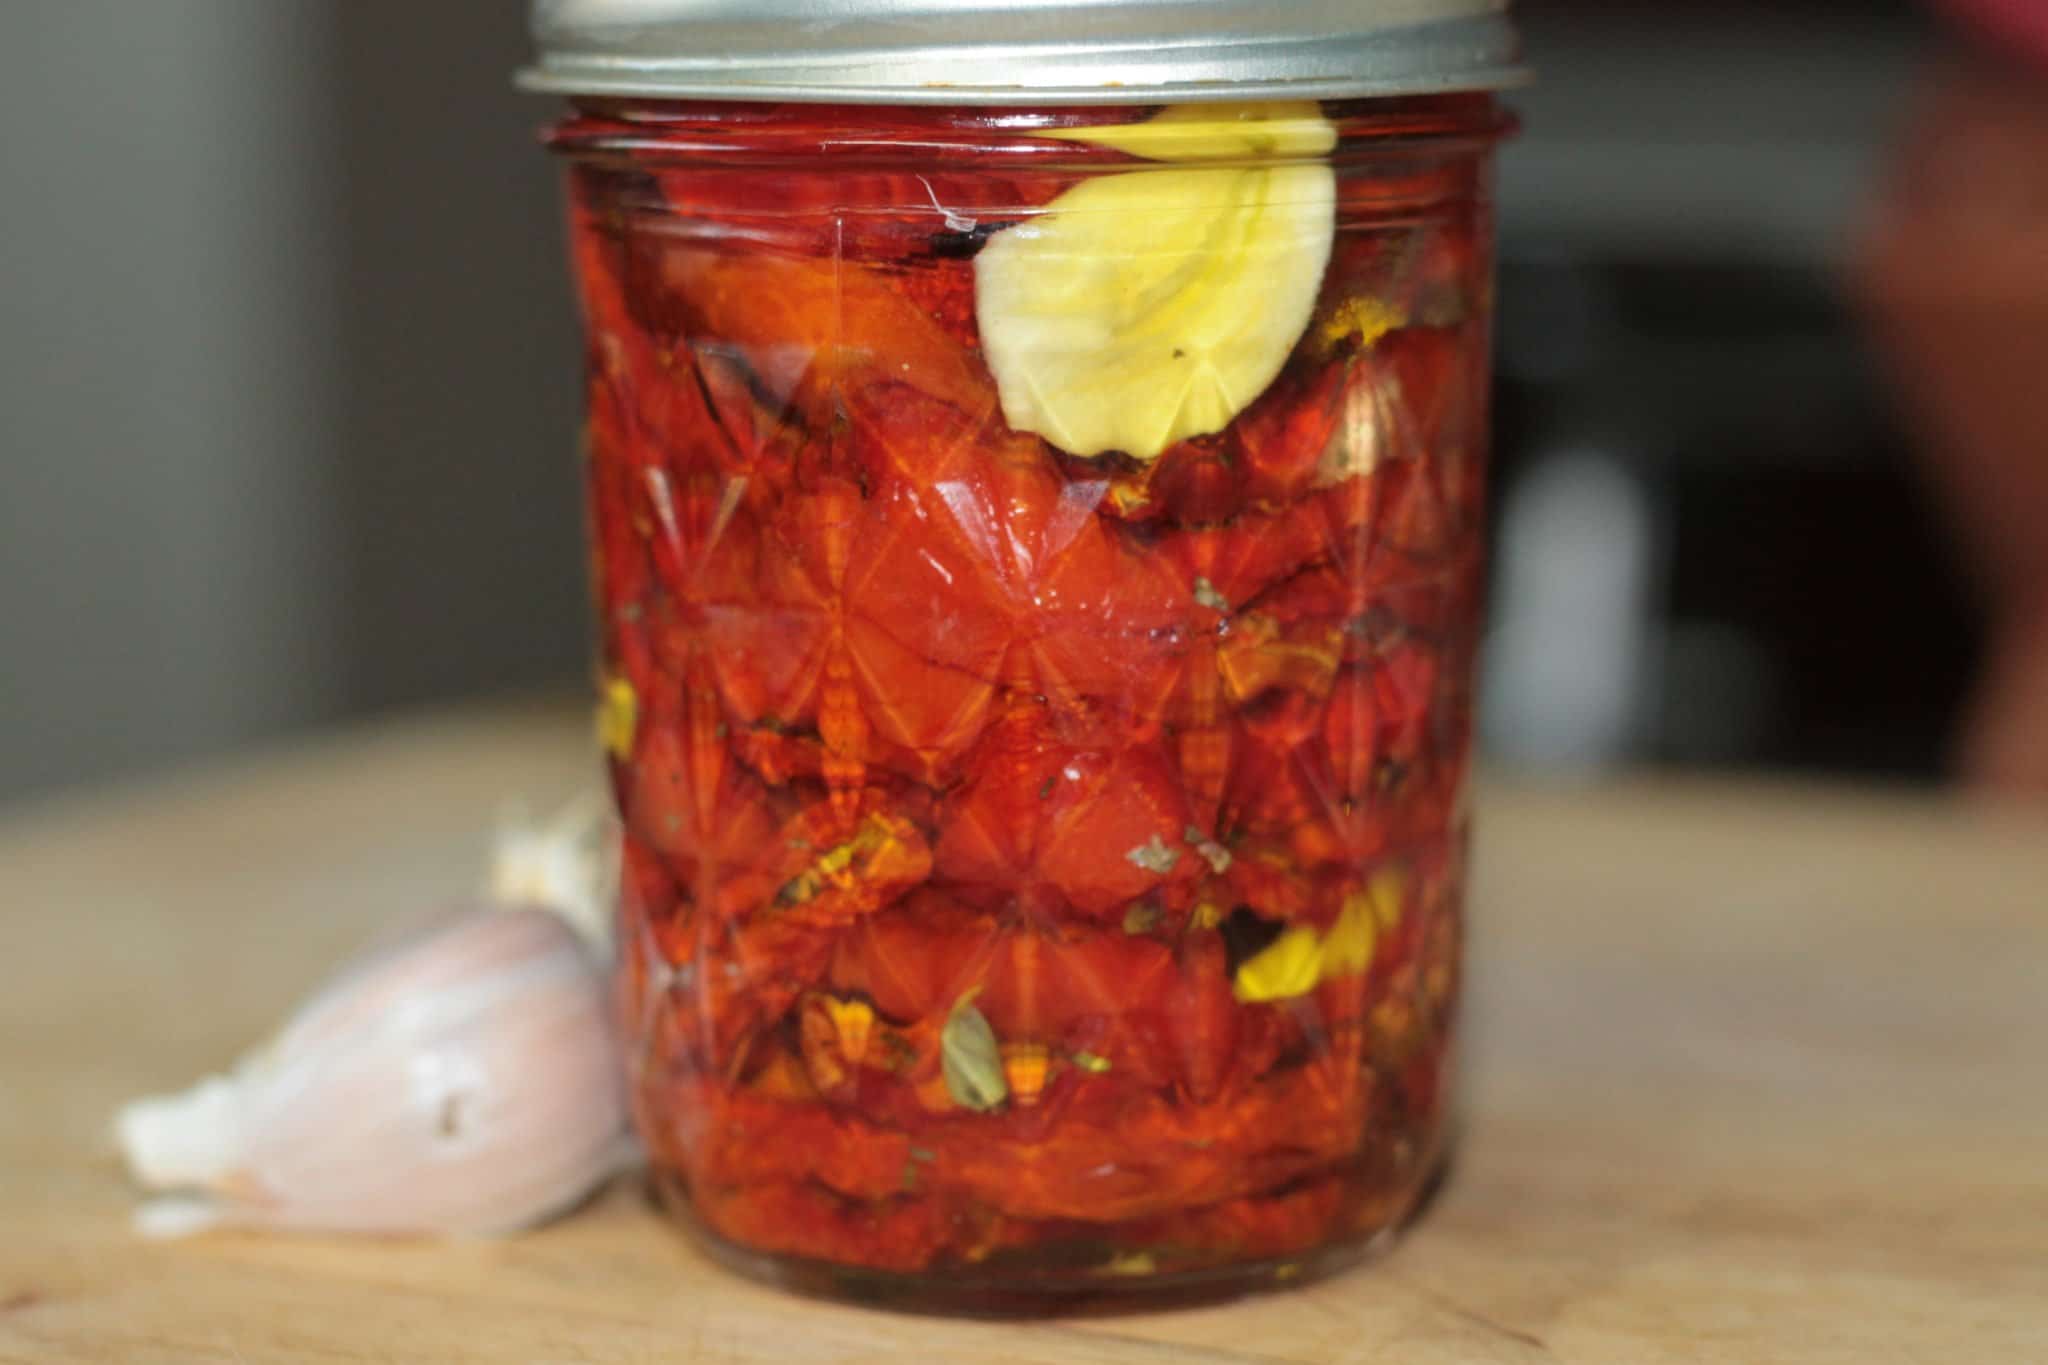 sun-dried tomatoes in a jar with garlic next to it